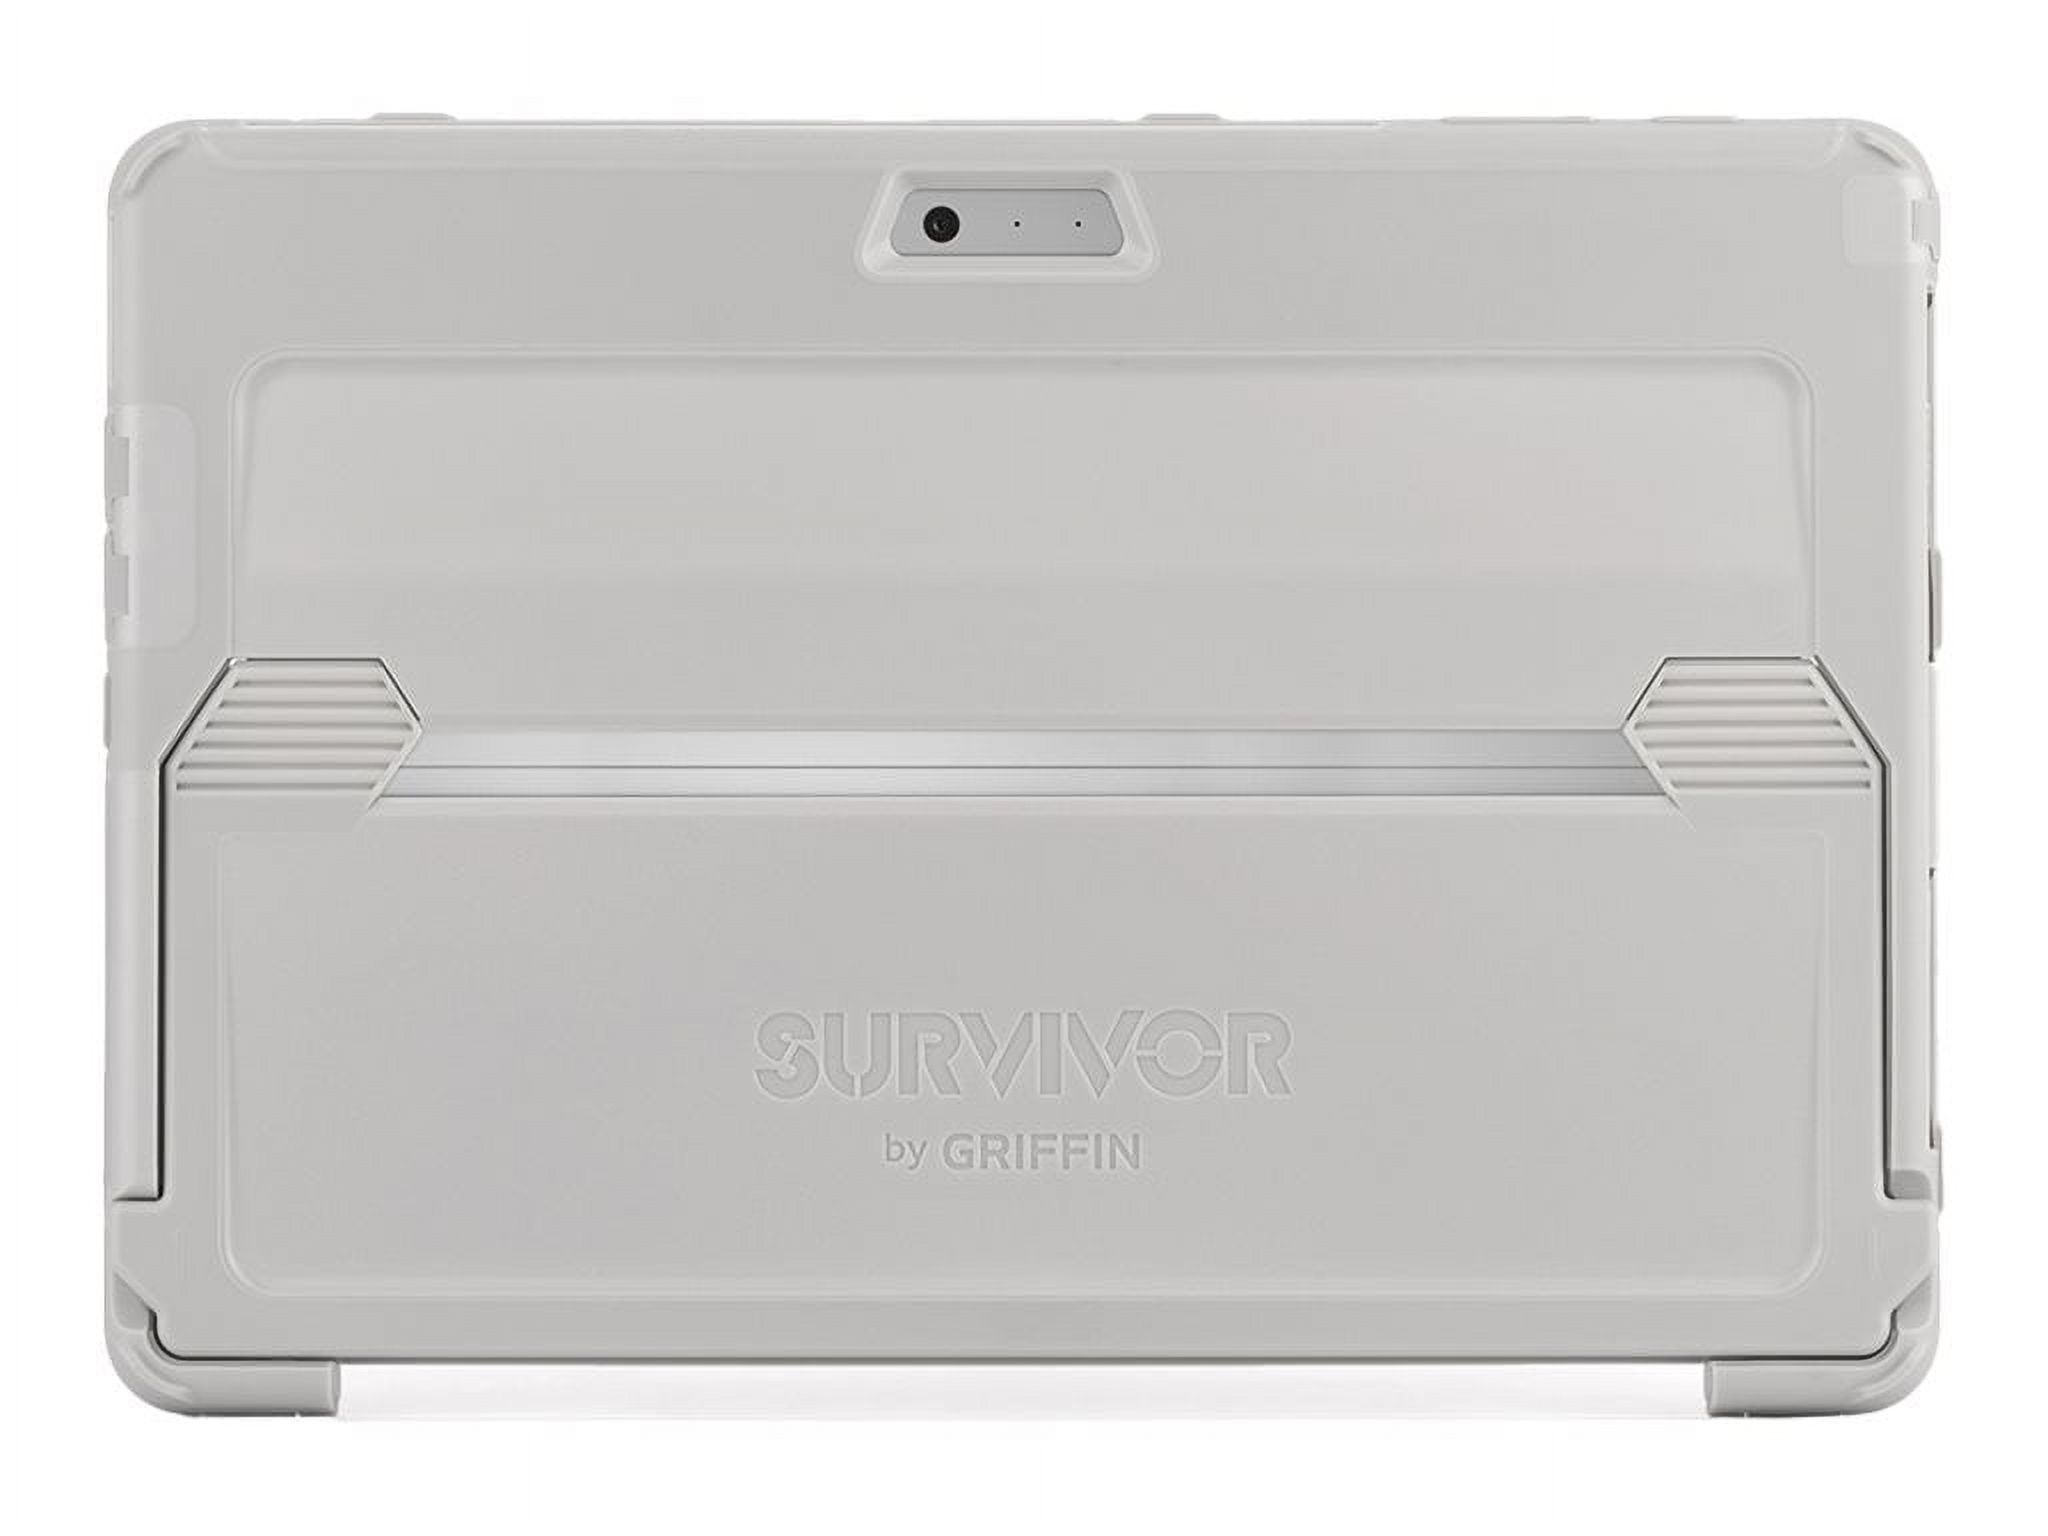 Griffin Survivor Slim - Protective case for tablet - rugged - silicone, PET, TPE, co-molded polycarbonate - gray - for Microsoft Surface Pro 4 - image 3 of 4